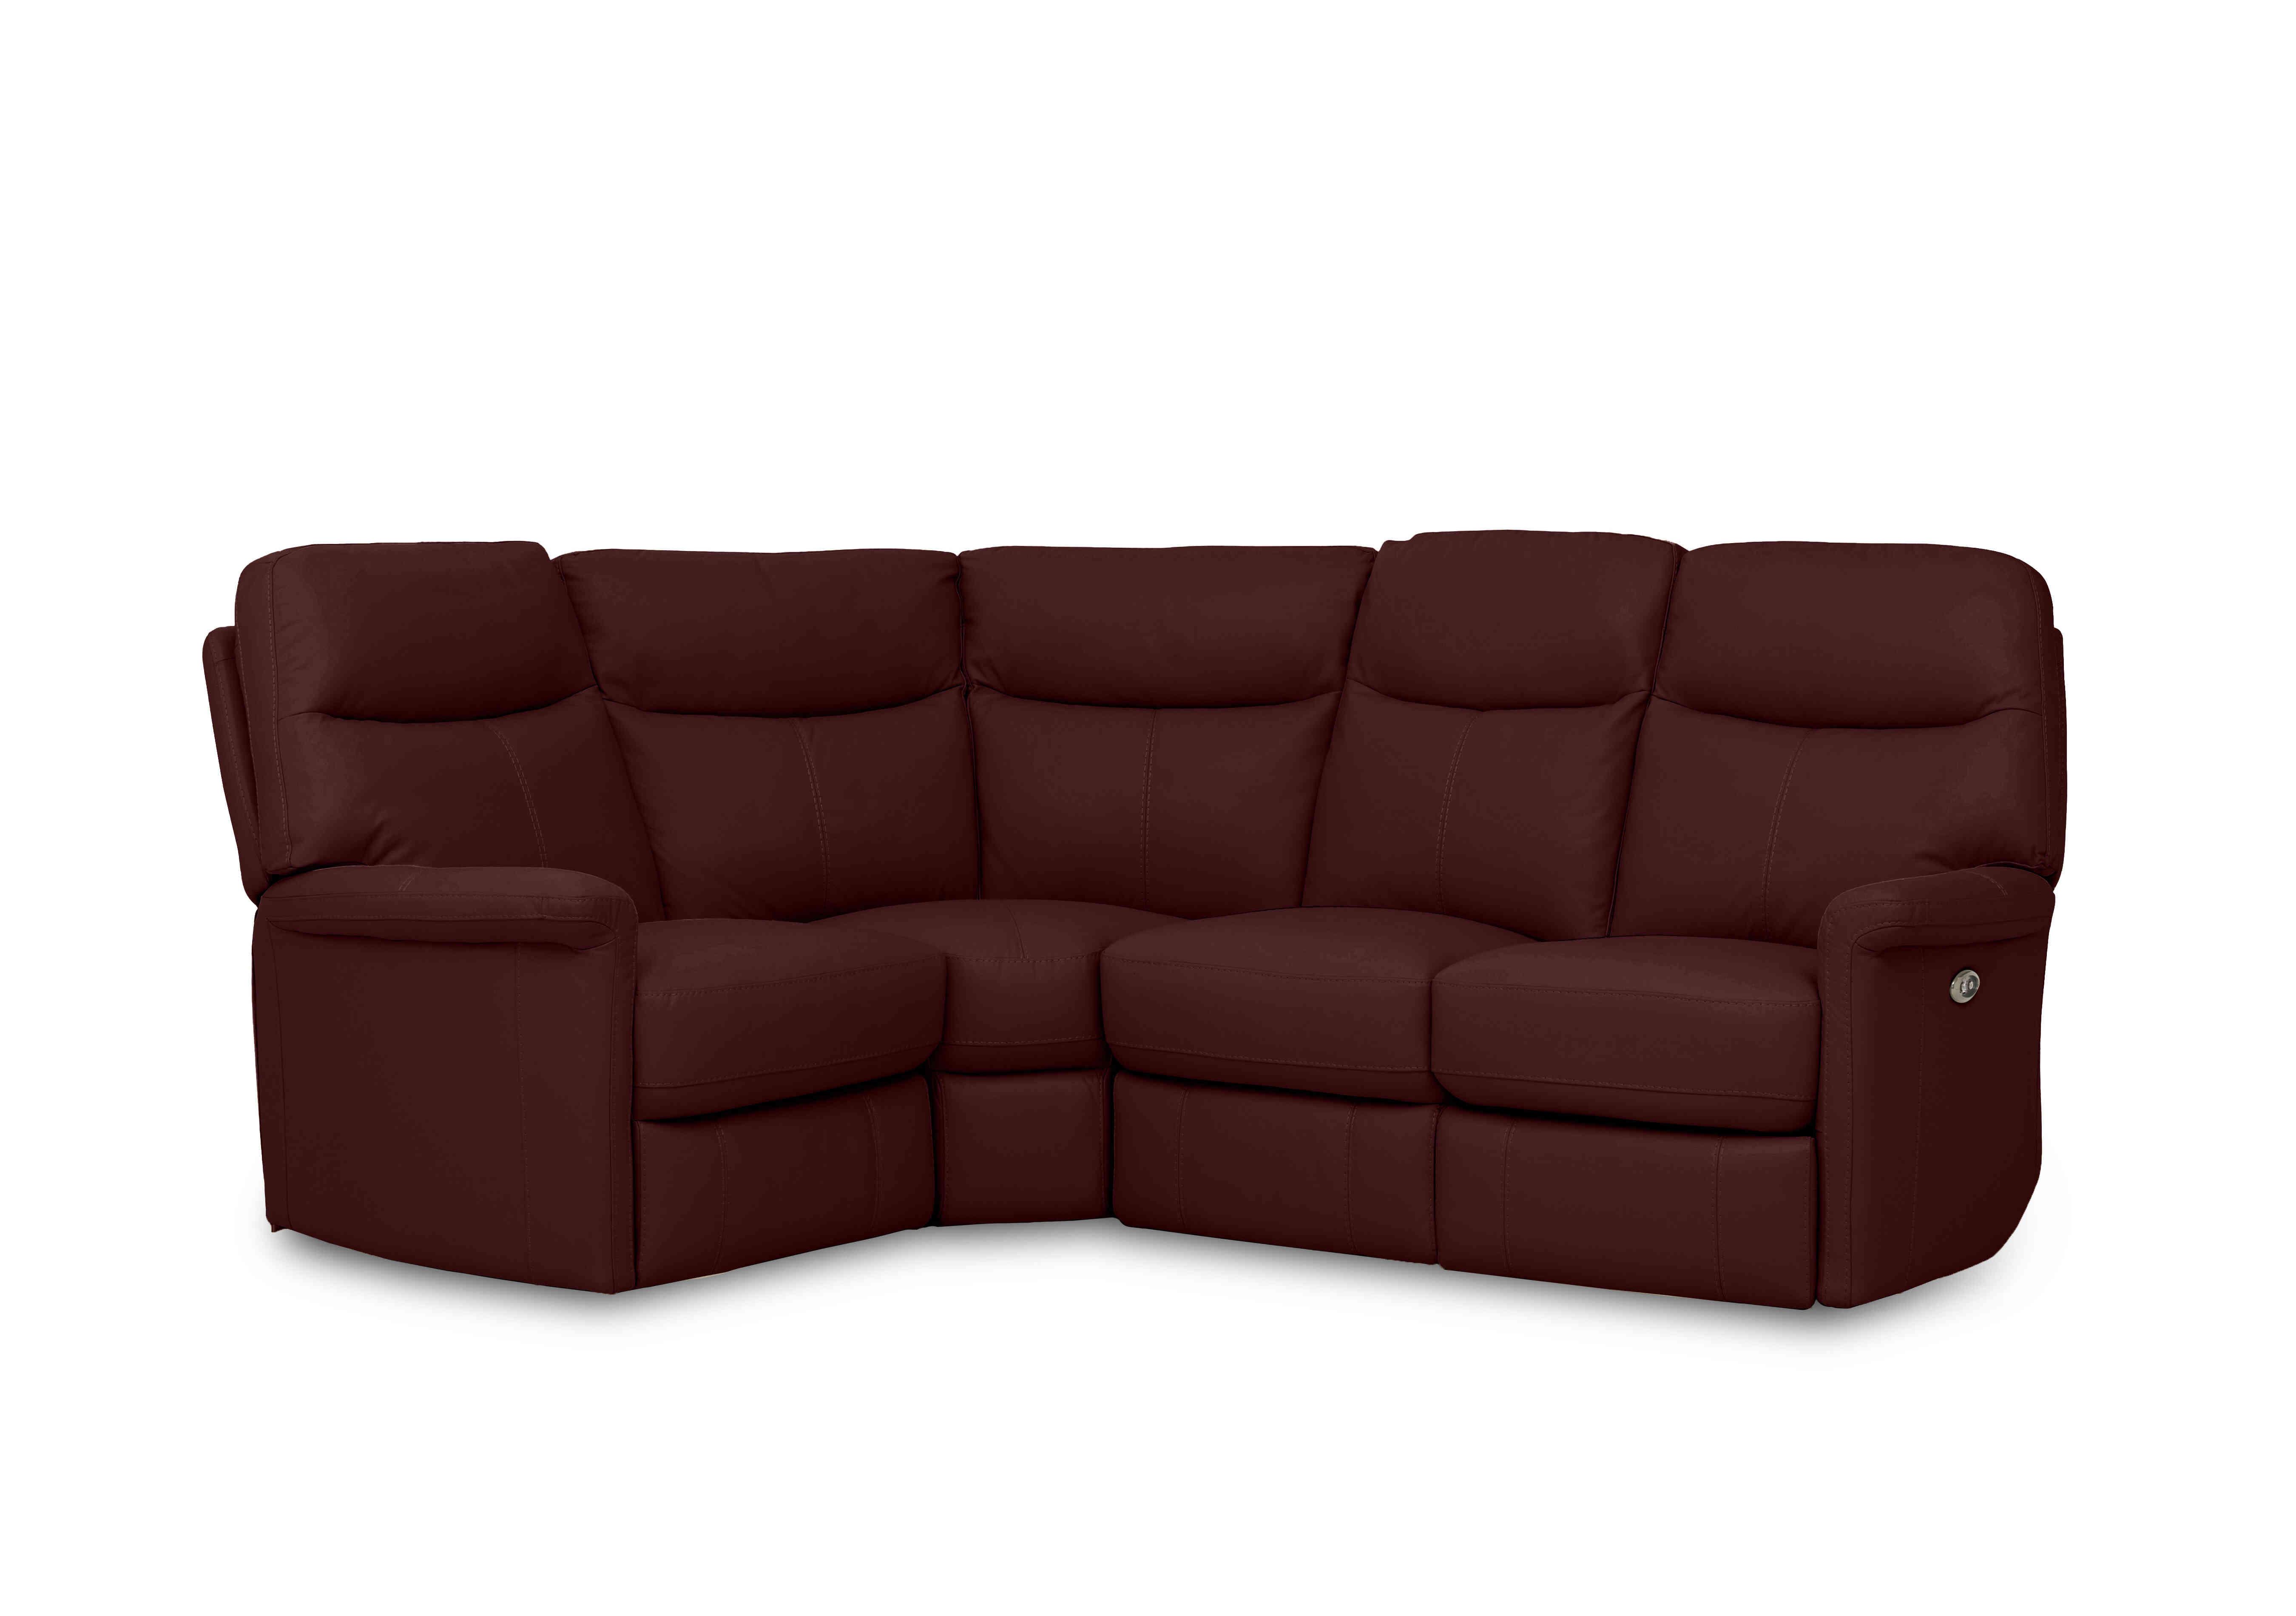 Compact Collection Lille Leather Corner Sofa in Bv-035c Deep Red on Furniture Village